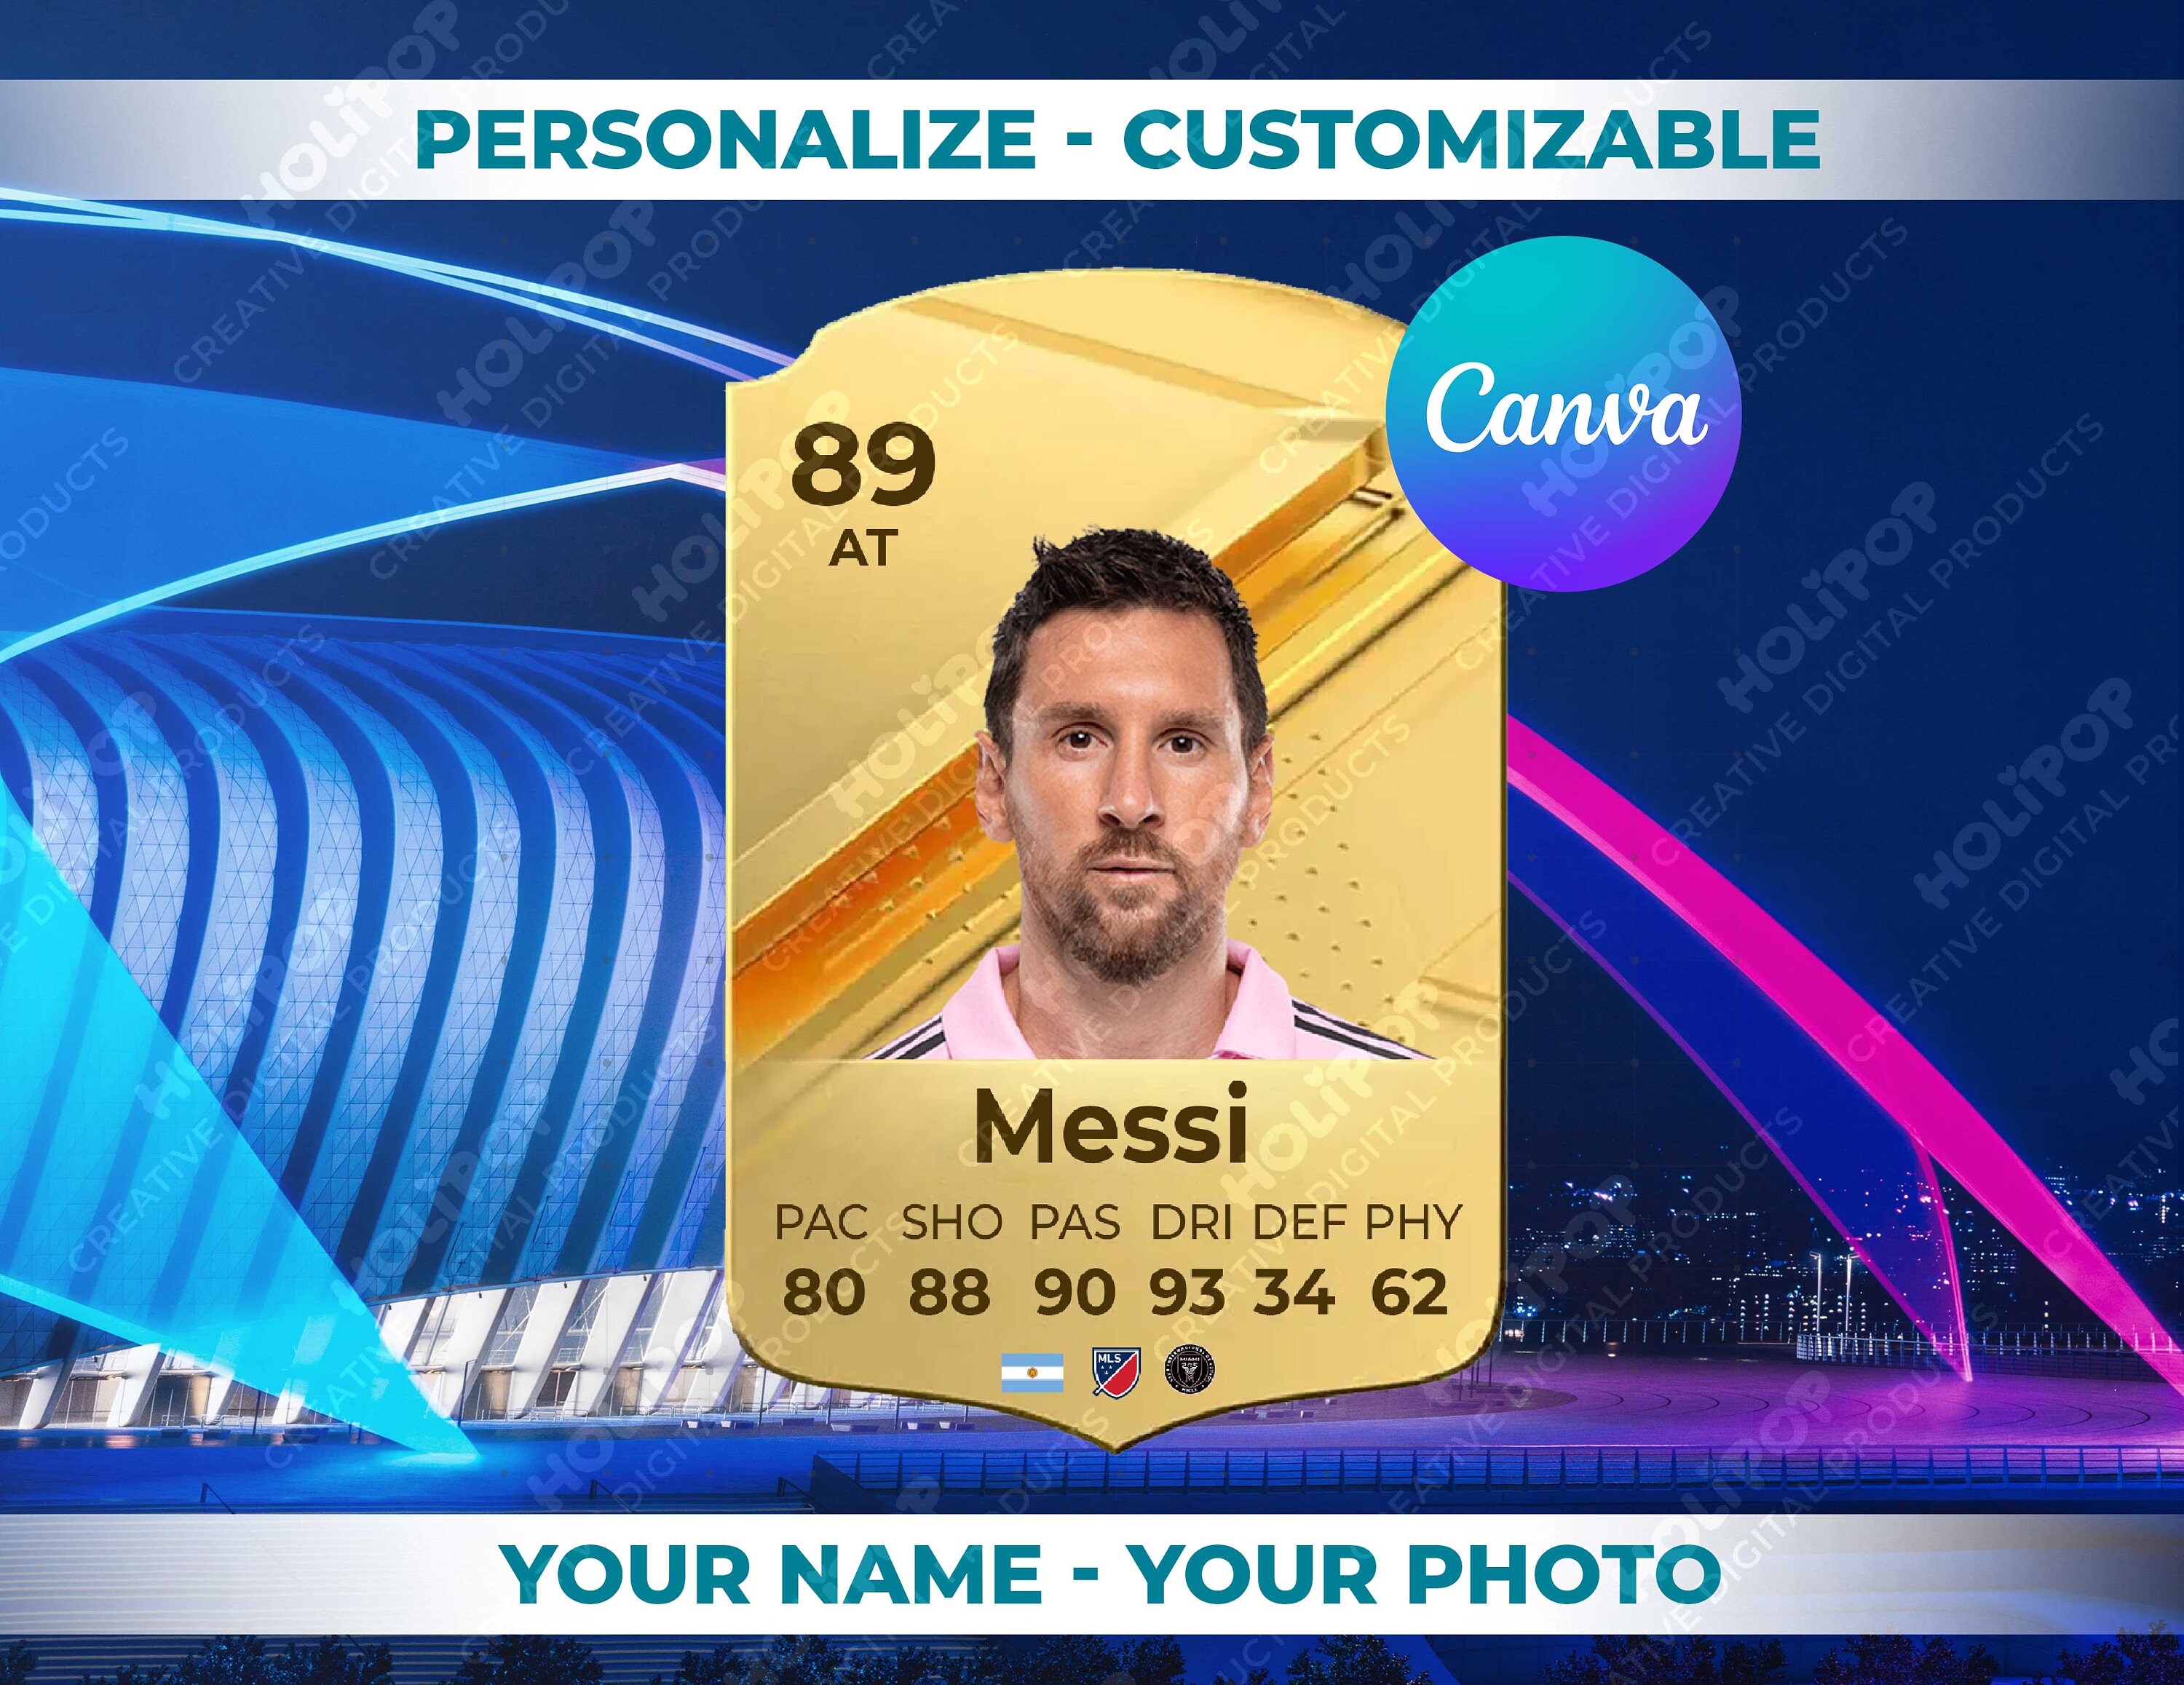 EAFC 24 Messi FUT Card, FIFA 2024 Ultimate Team, Digital Download,  Customizable Canva Prints, Your Image, Stats, Canva Template Messi Card -   Denmark